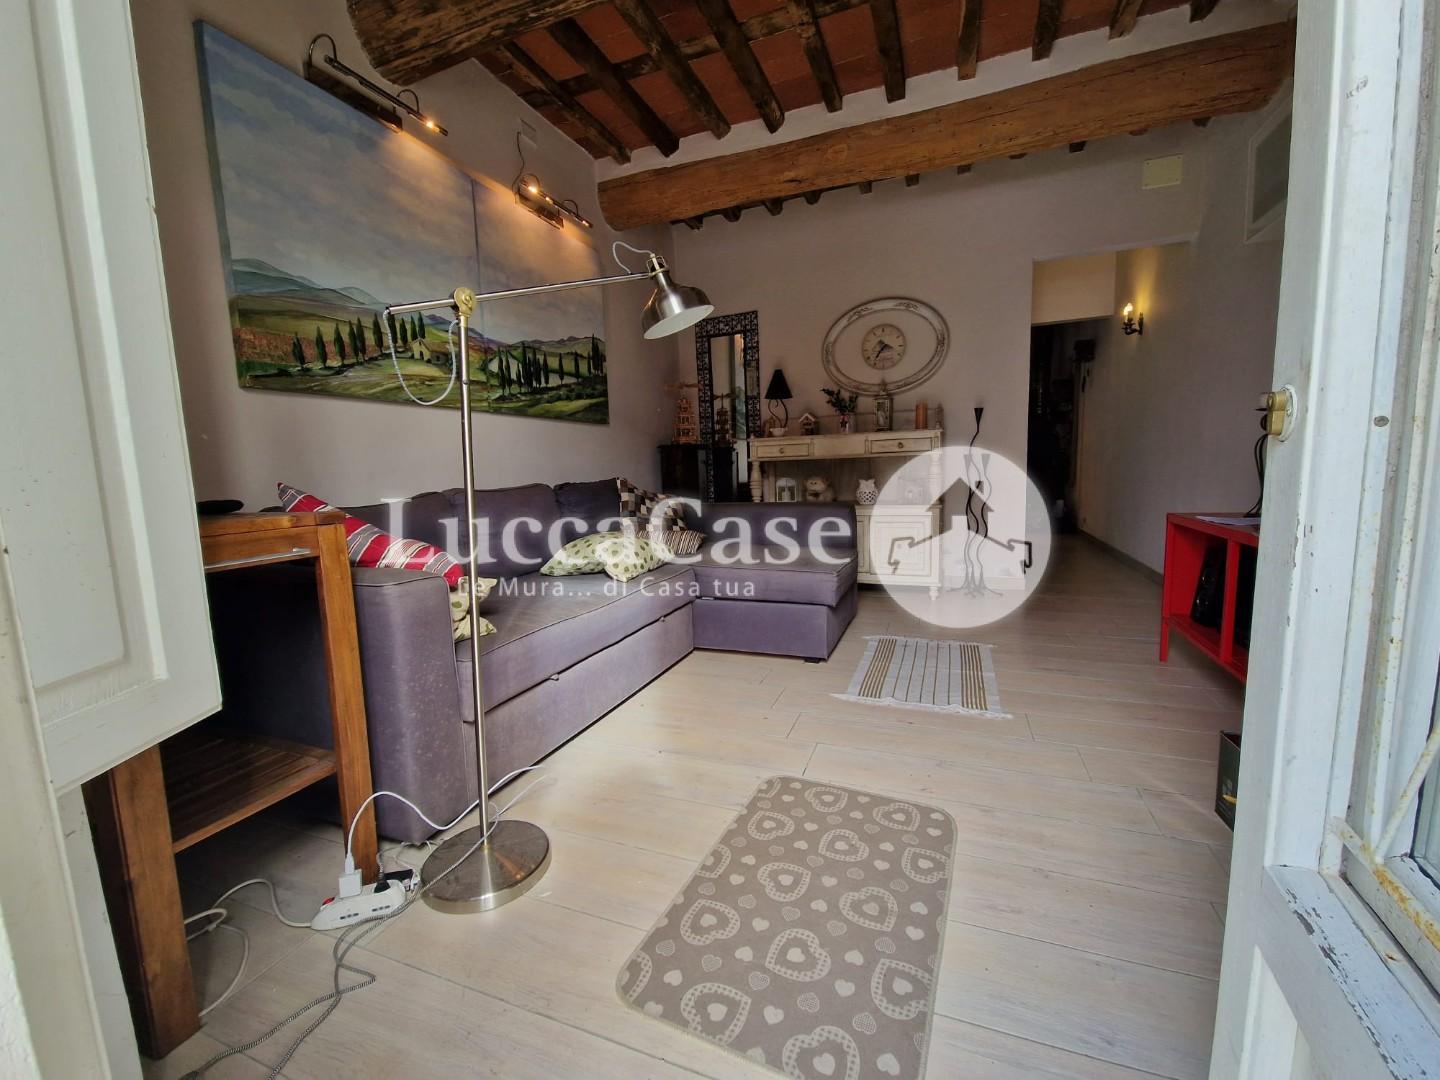 Townhouses for sale in Lucca